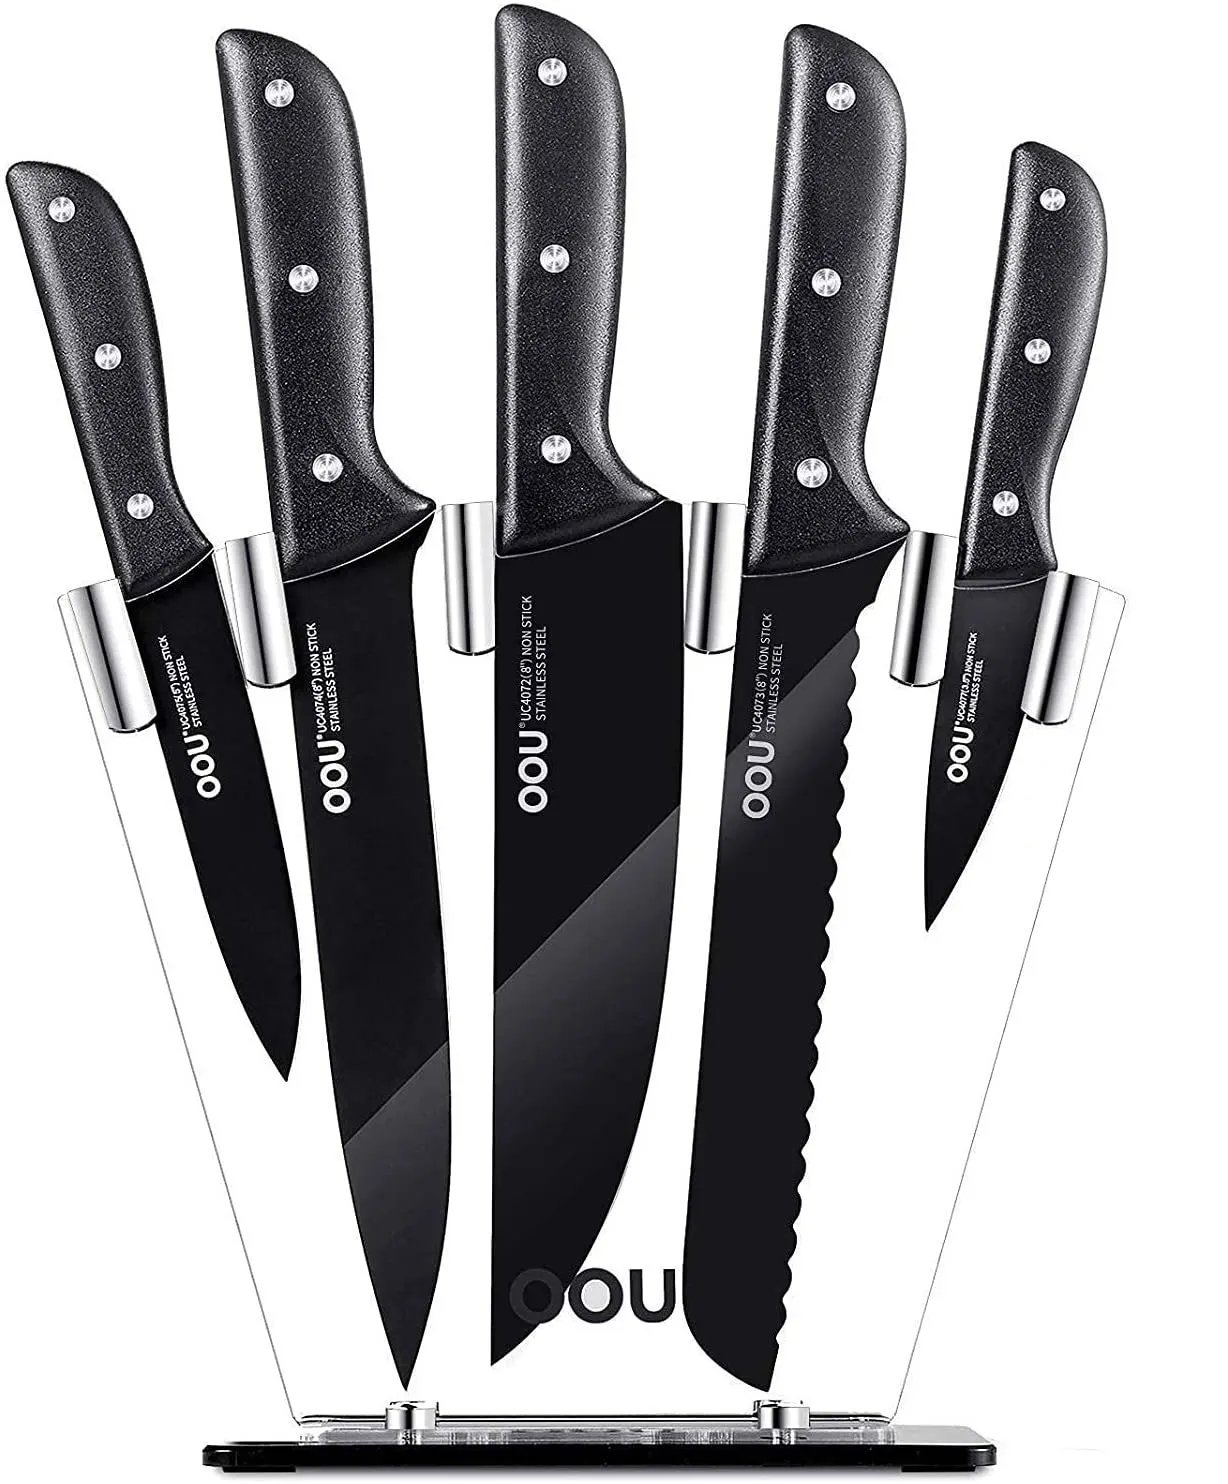 

OOU Chef Series Kitchen Knife Set with Holder Best Lo Mas Vendido BO Oxidation Patent Black Kitchen Knife Stainless Steel ABS